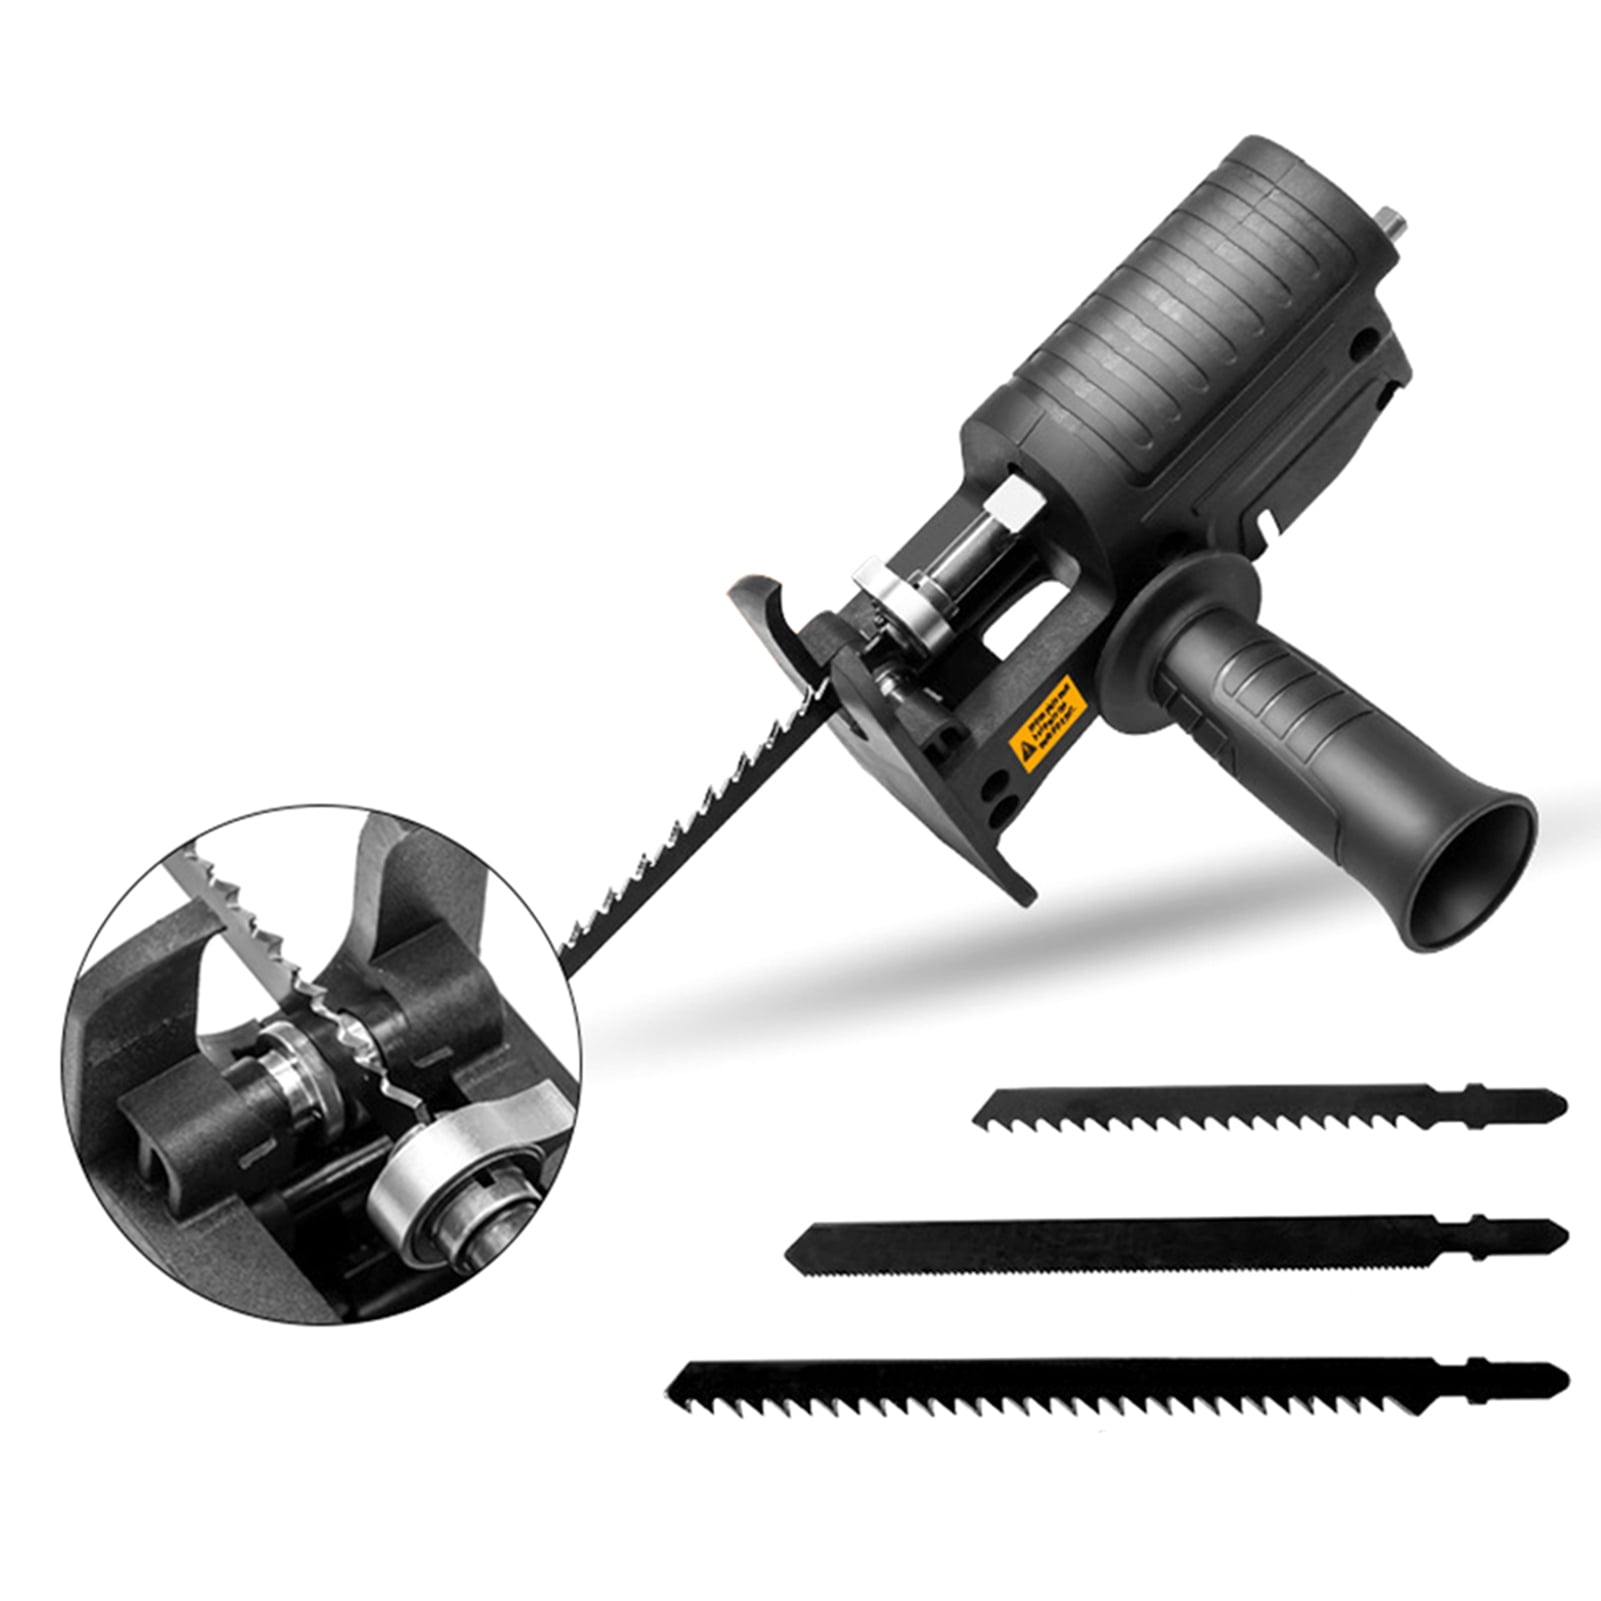 Portable Reciprocating Saw Adapter Multifunctional Electric Drill